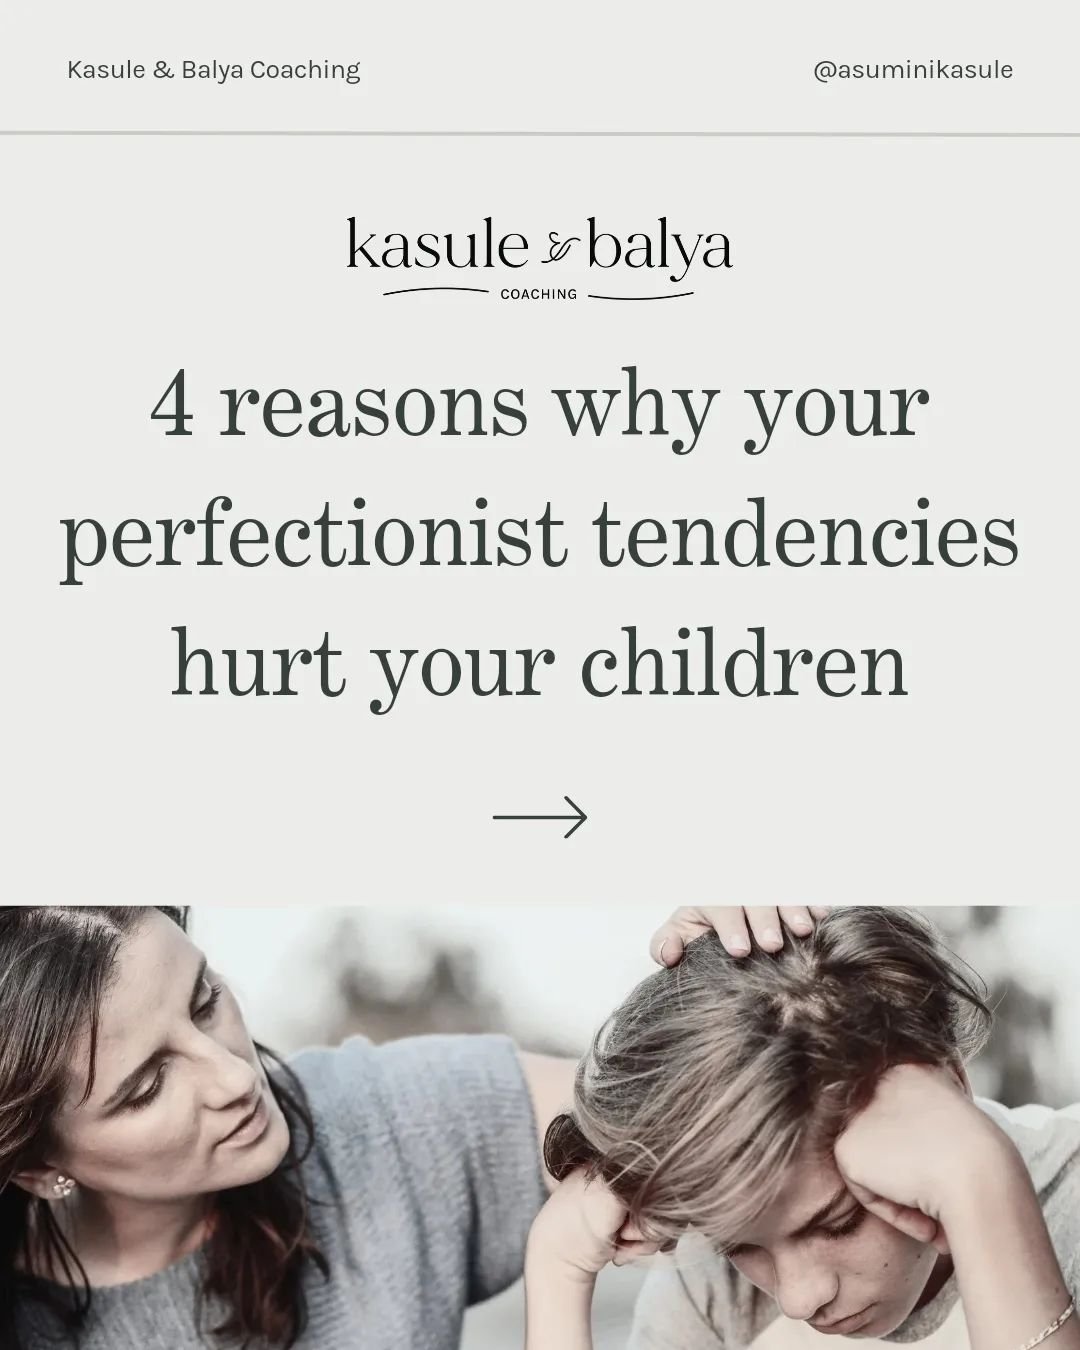 Perfectionism is an illusion.  It is not reality and can create barriers to understanding, compassion, and connection with children, making it important for you to recognize and address perfectionistic tendencies in yourself in order to foster health